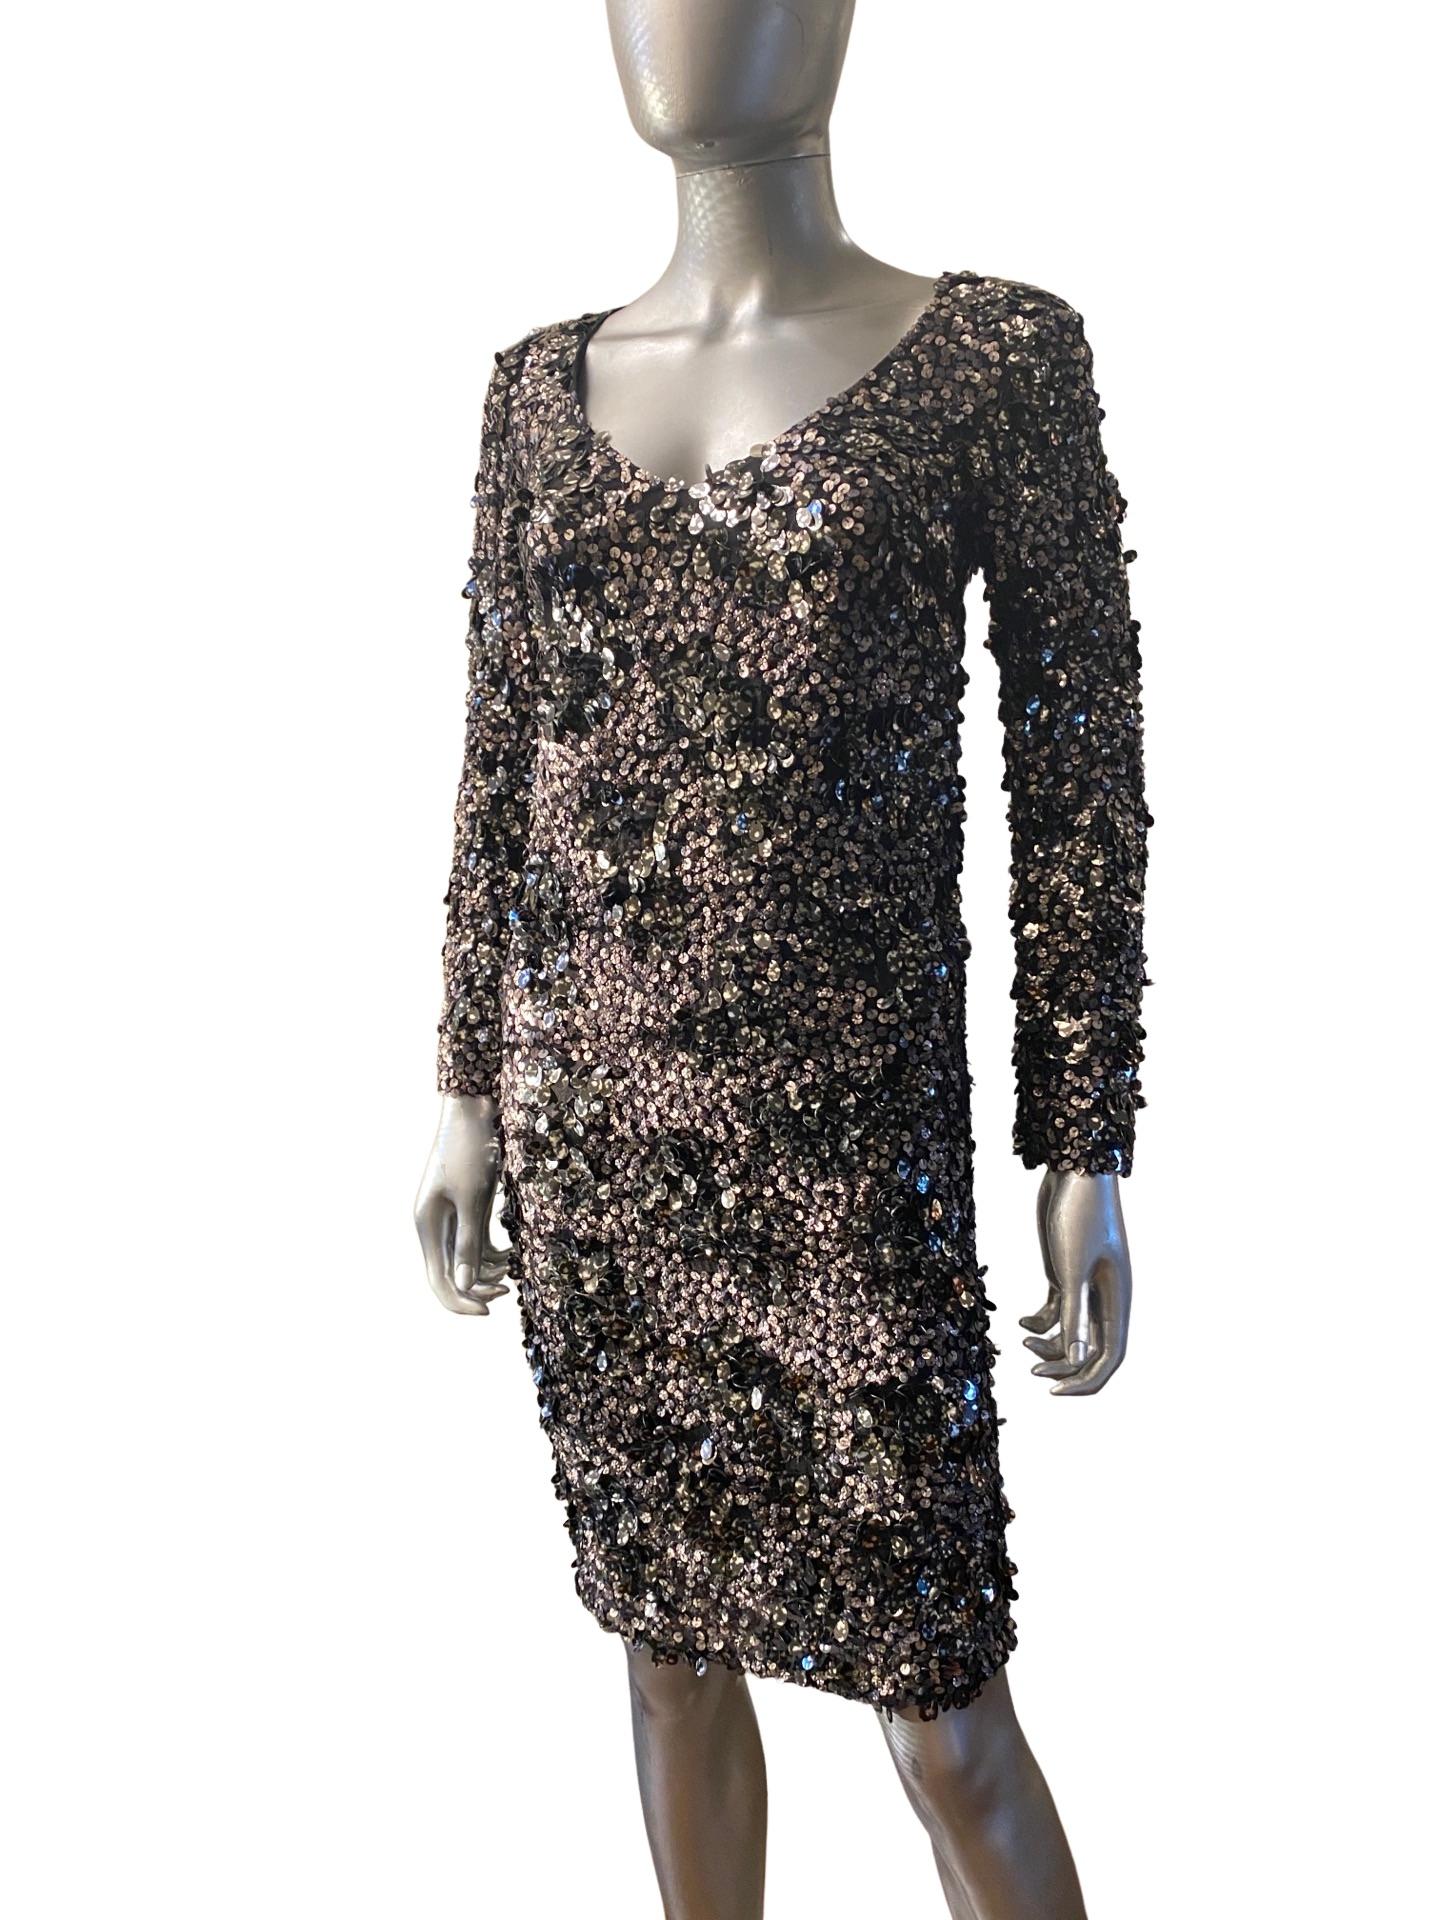 St John Couture Modern Silk Dress with 3D Shimmy  Sexy Dangling Sequins Size 2.  For Sale 3